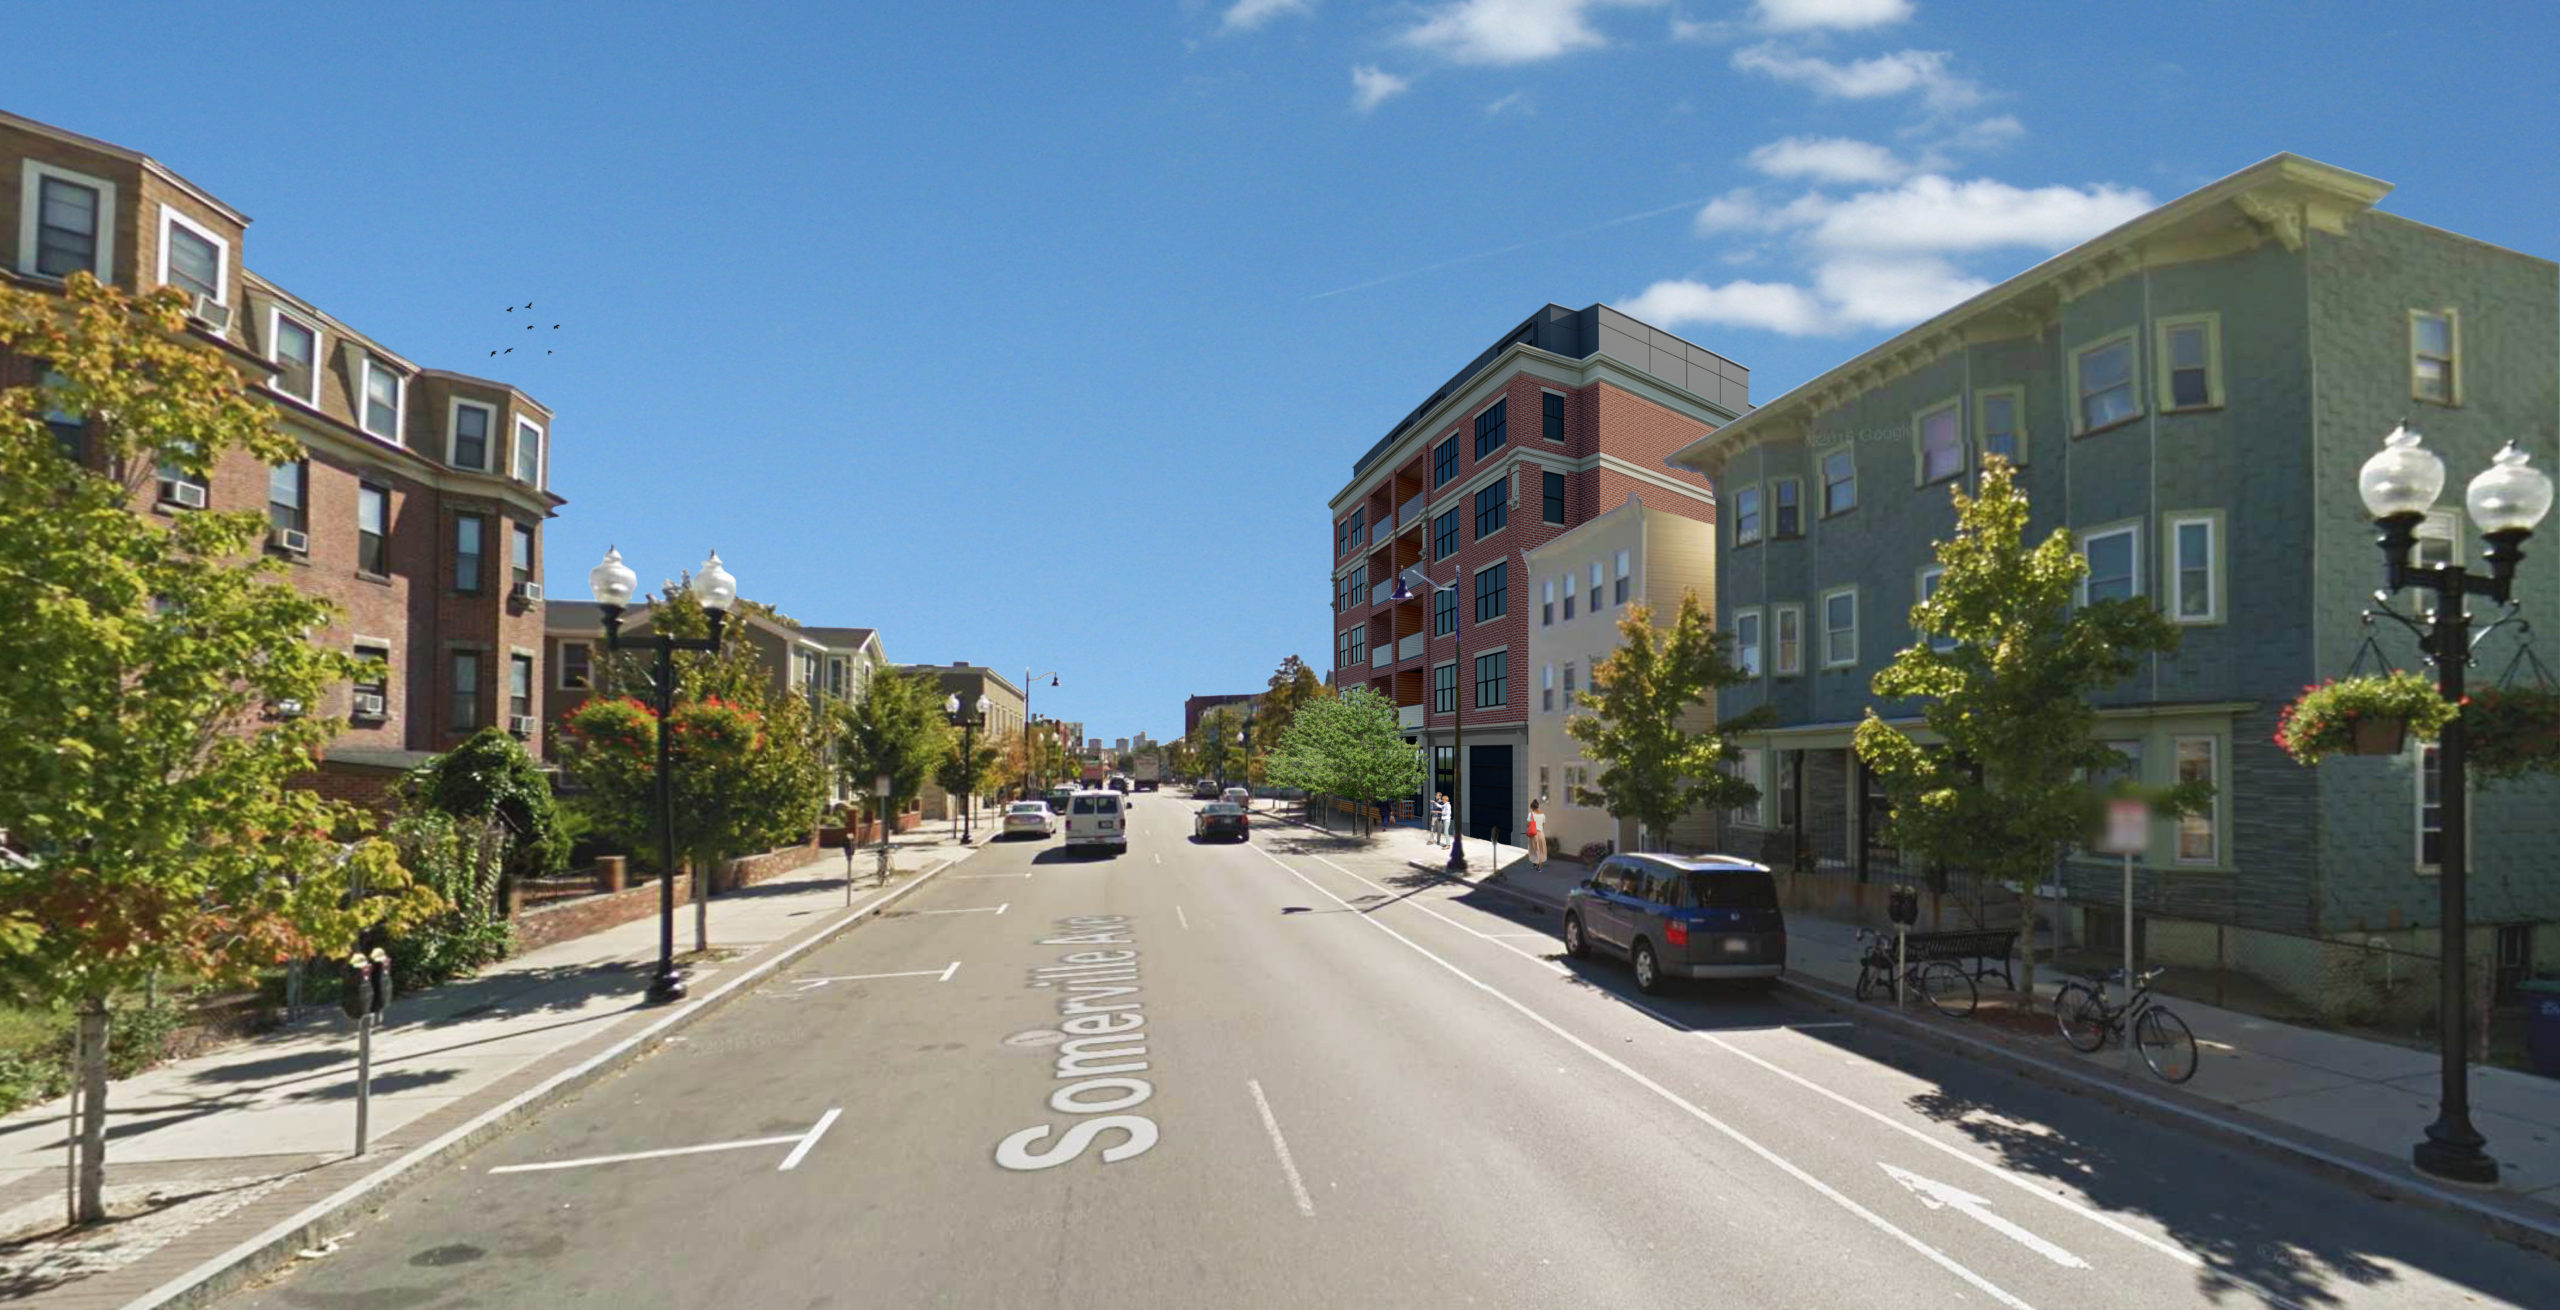 Somerville-Ave-Street-View-2-scaled.jpg